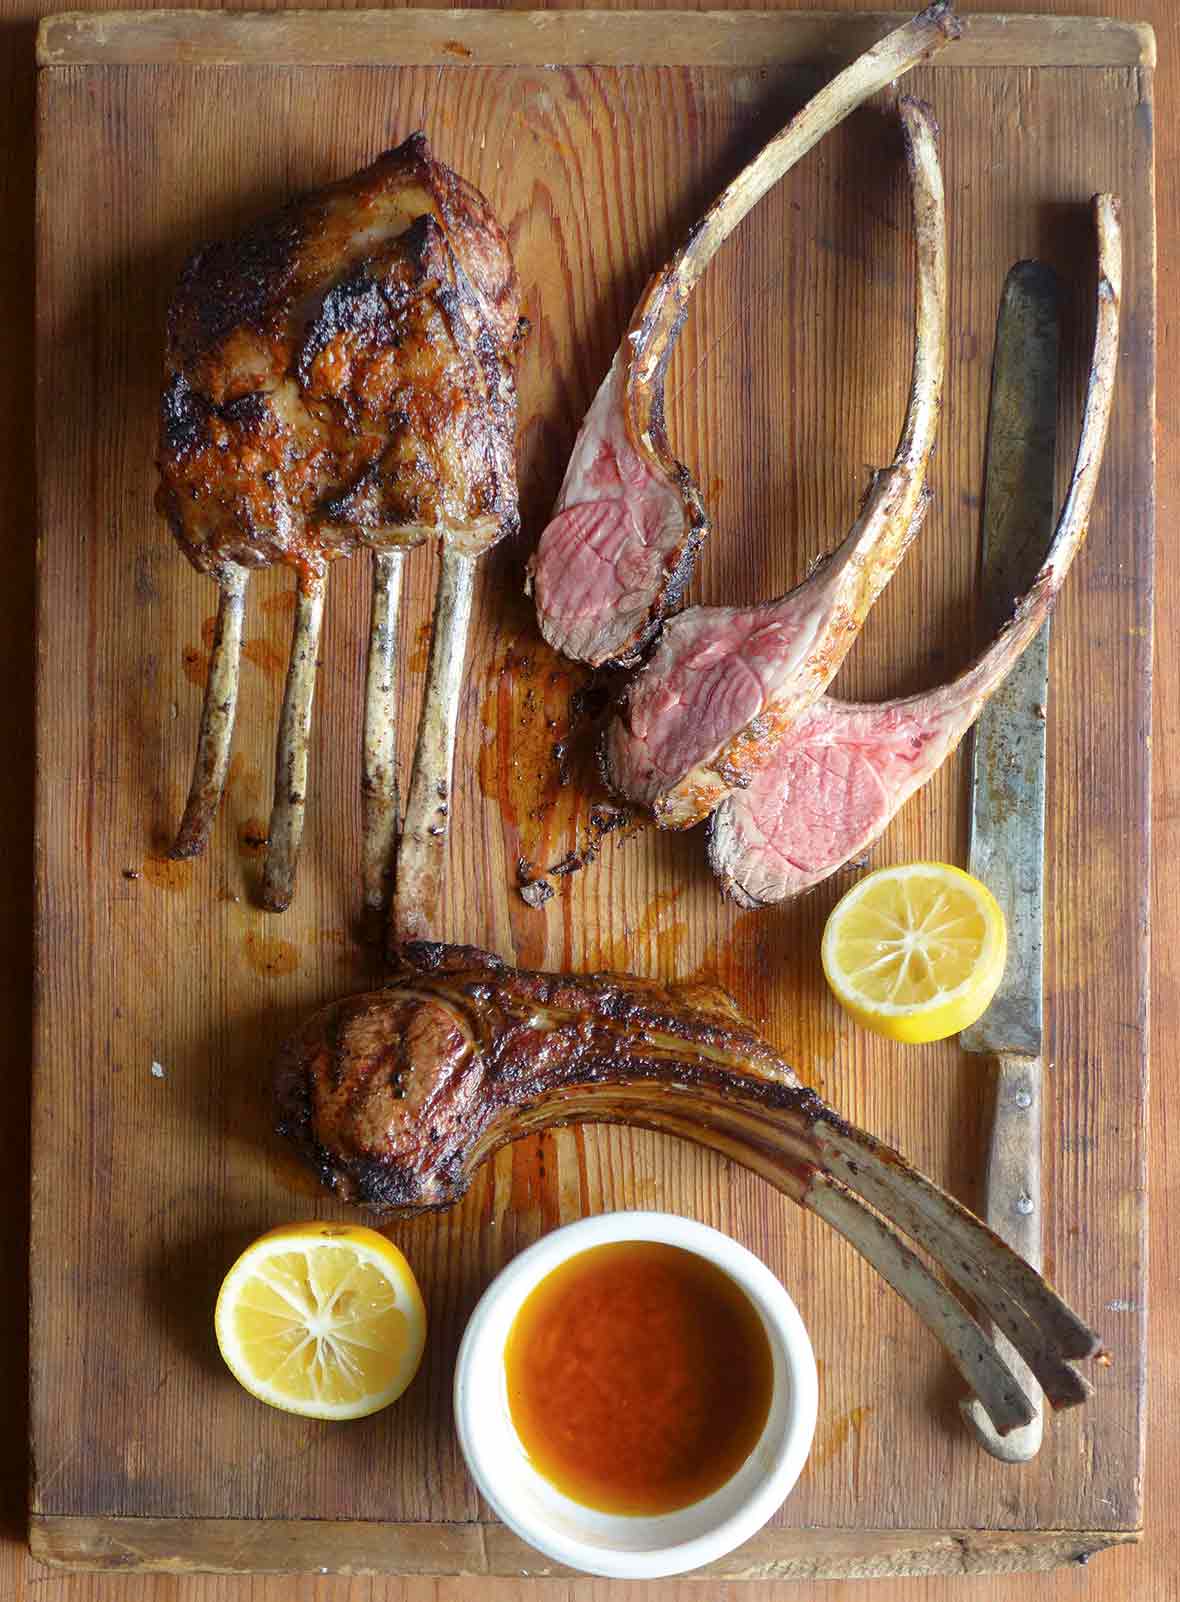 A cutting board with lamb chops, some in racks, some sliced, along jus and lemon halves